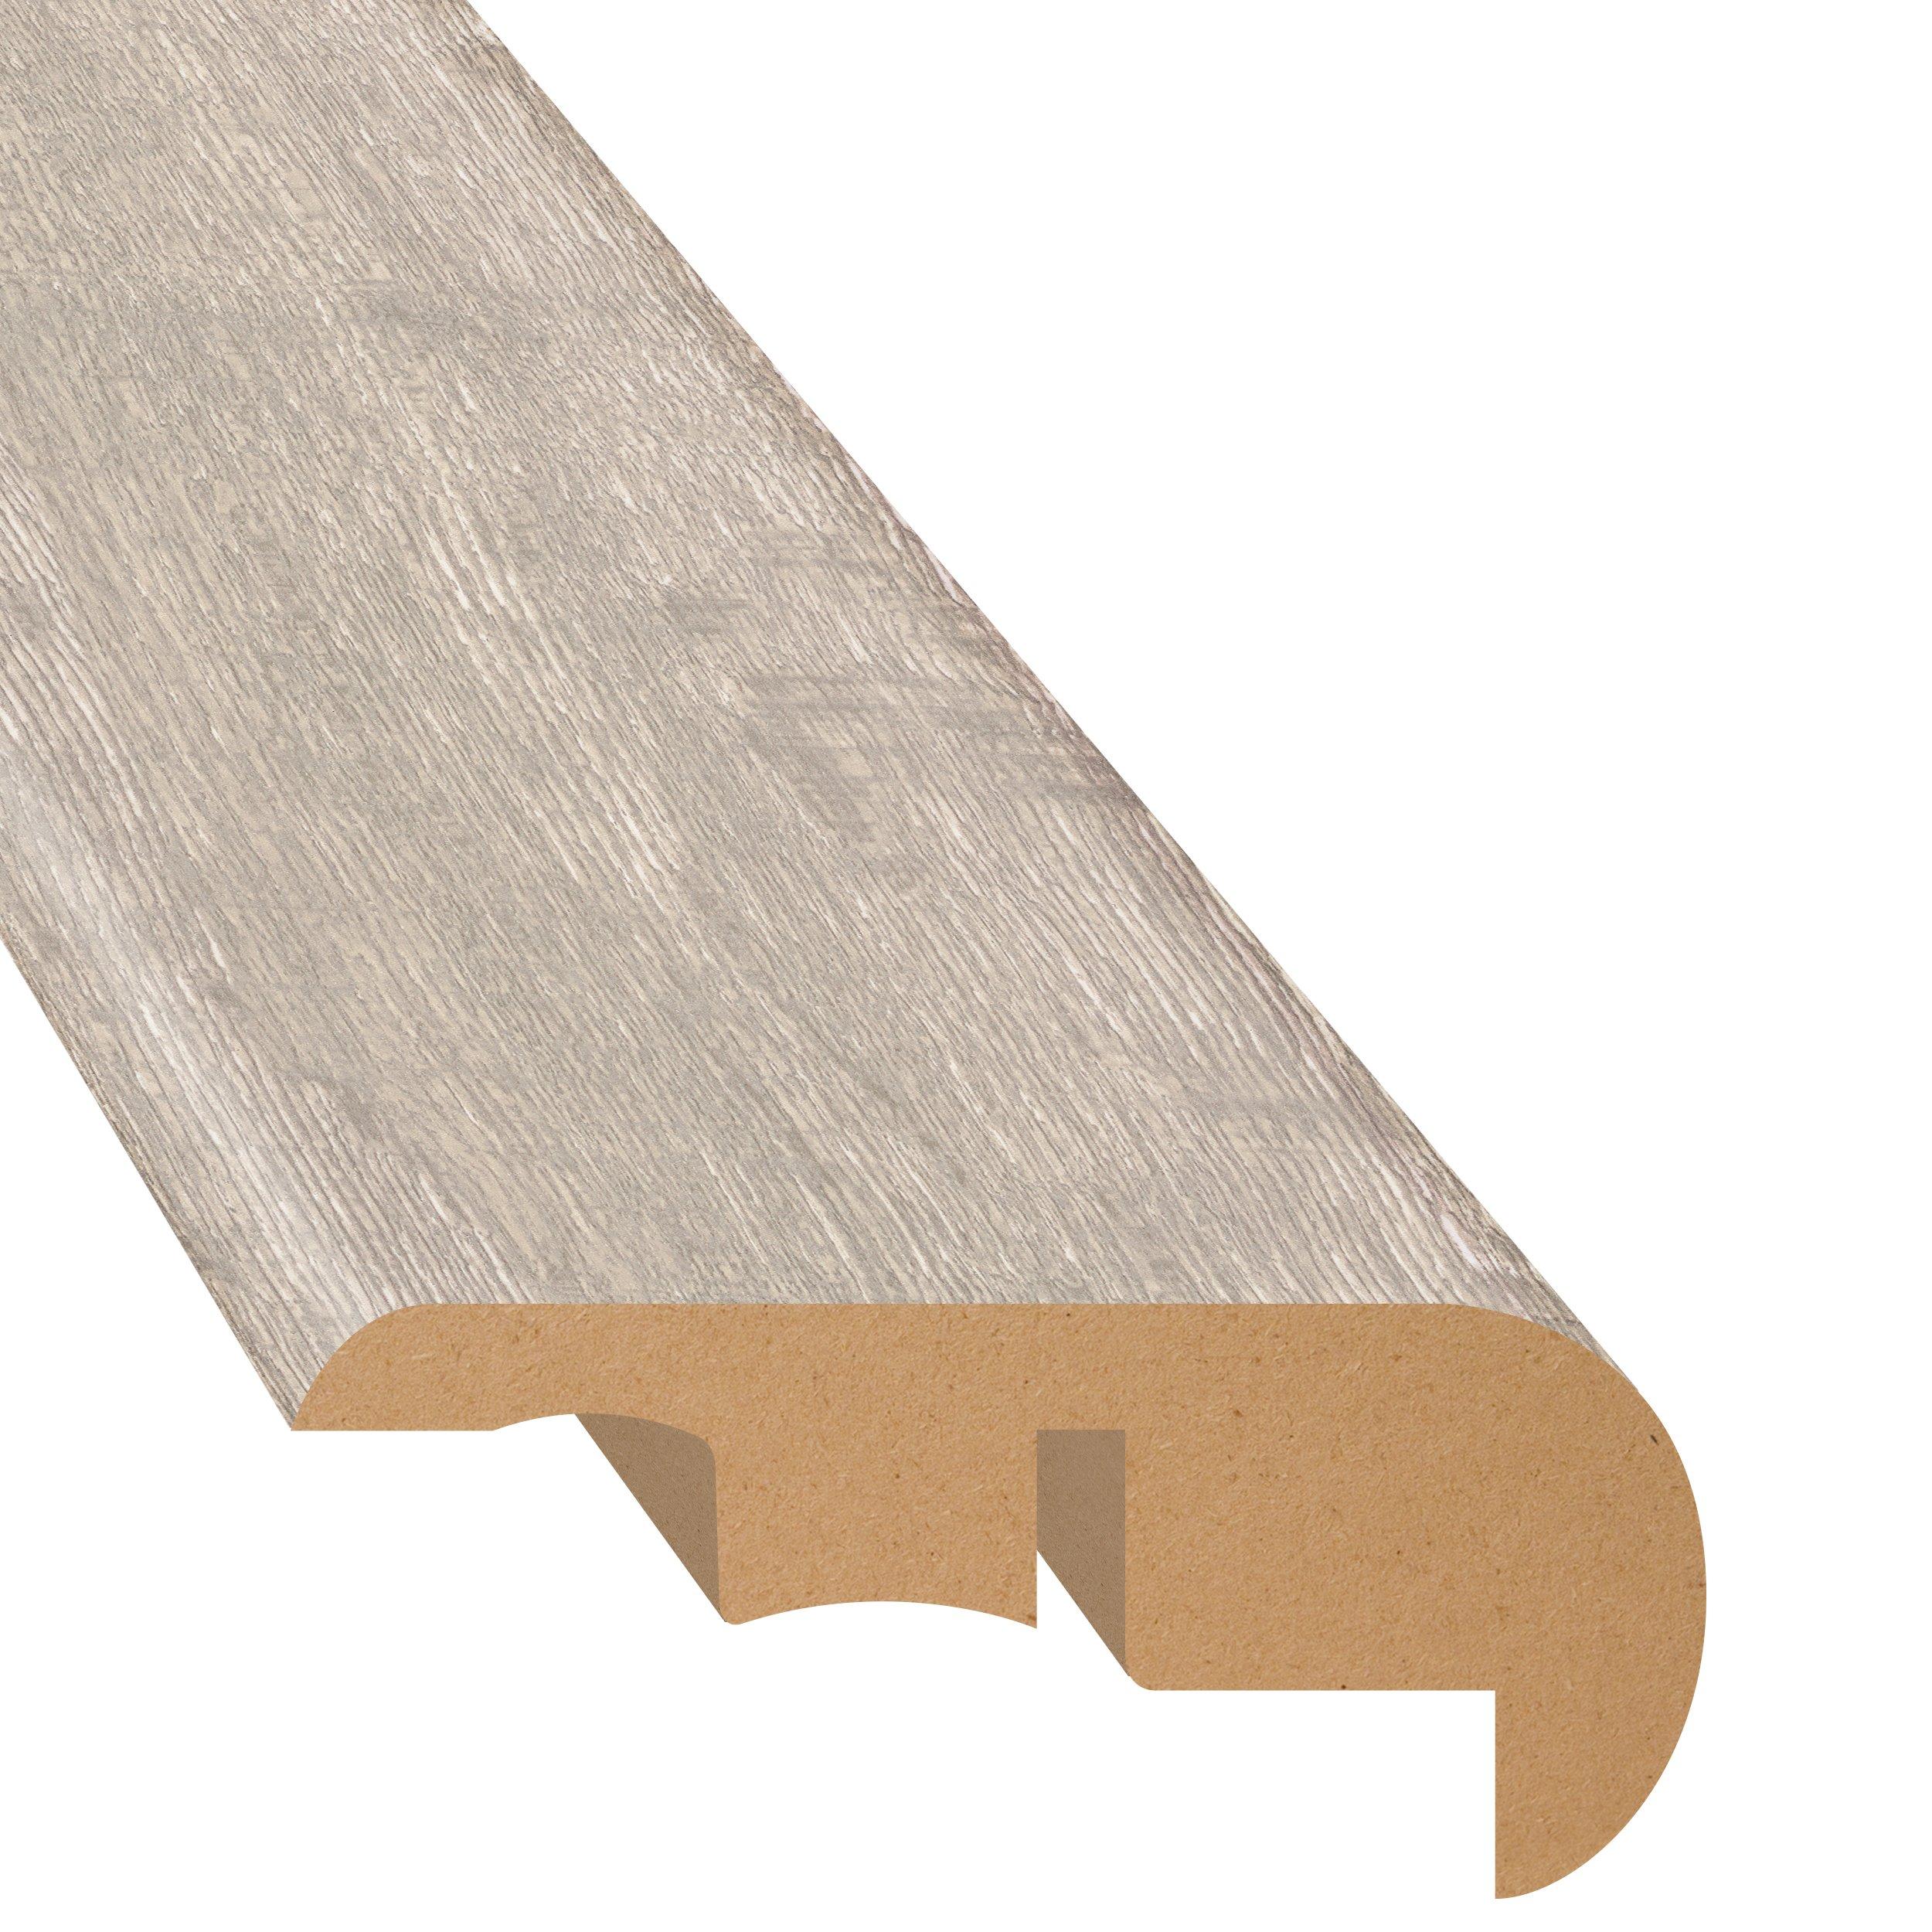 Buff Cream 94in. Laminate Overlapping Stair Nose